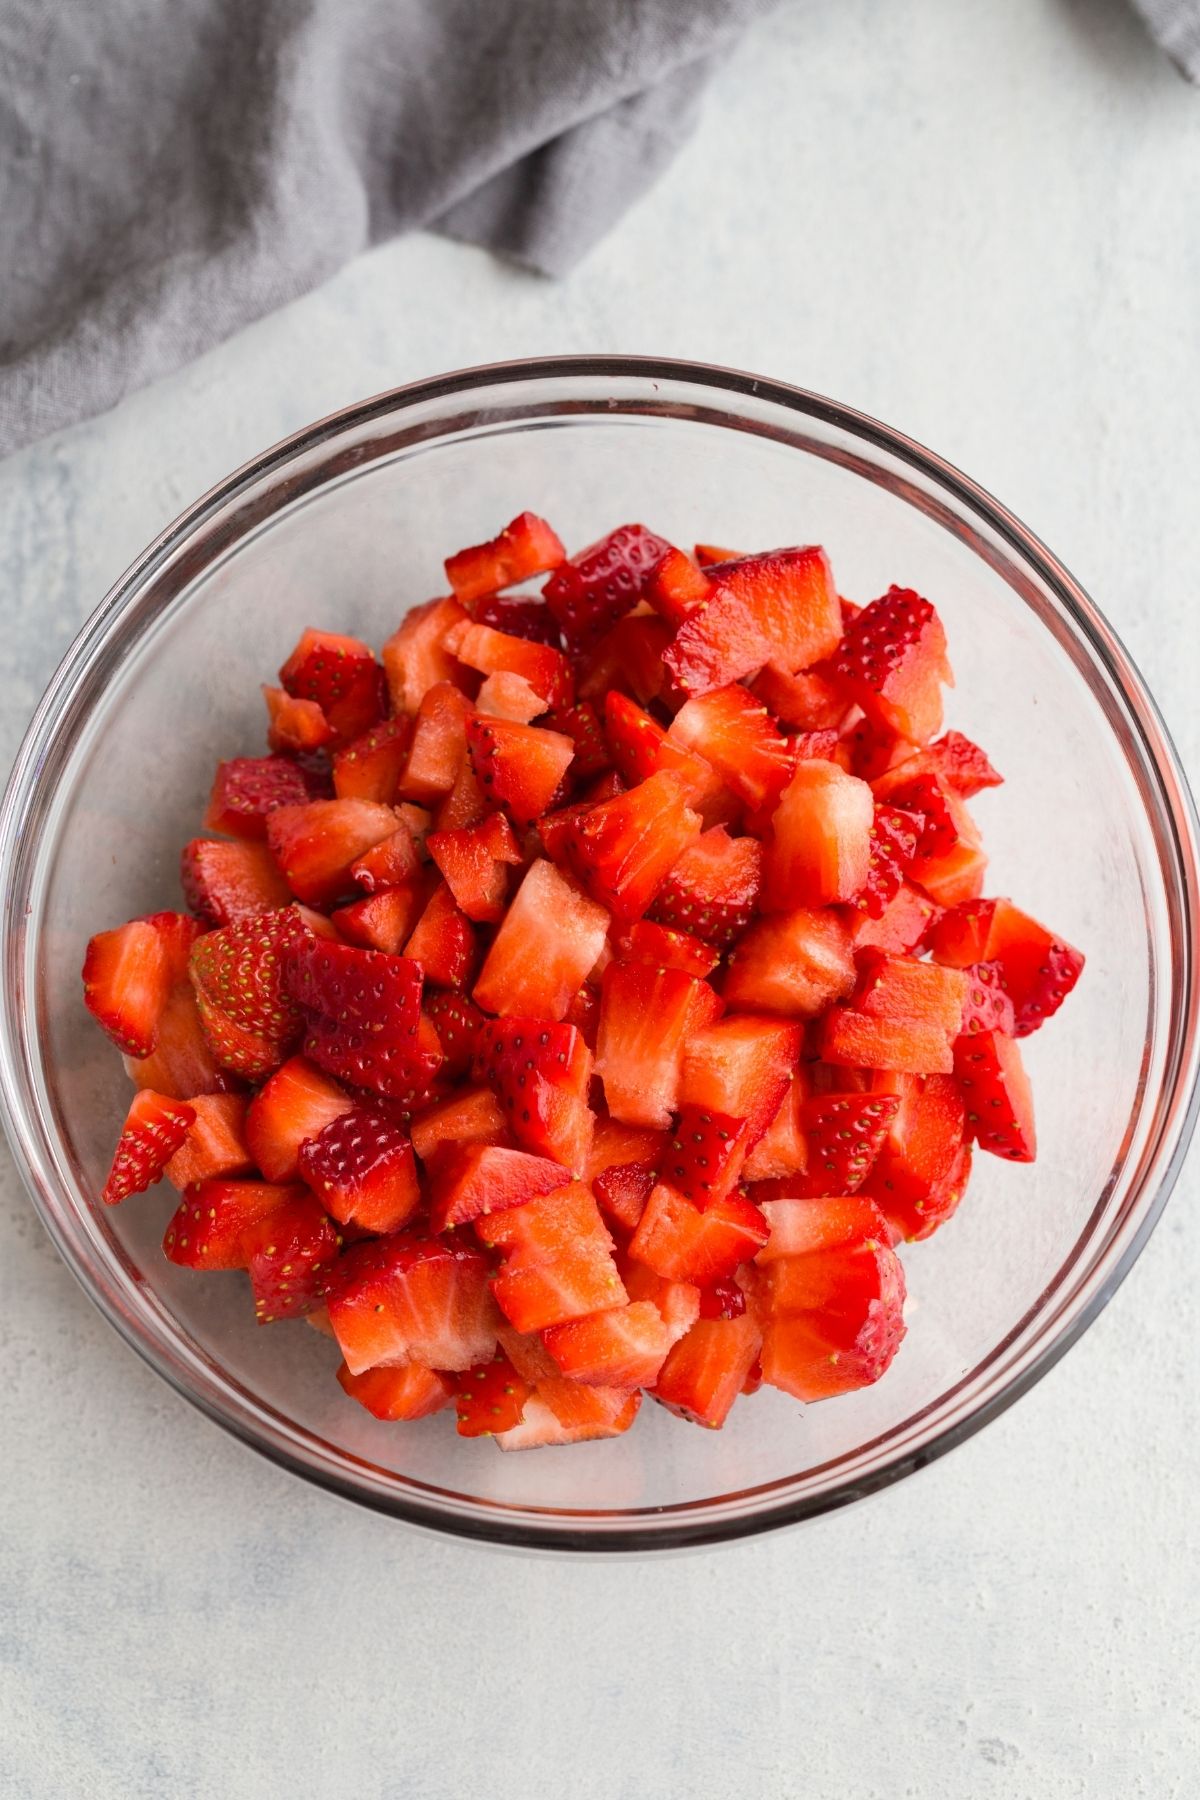 Diced strawberries in glass bowl.